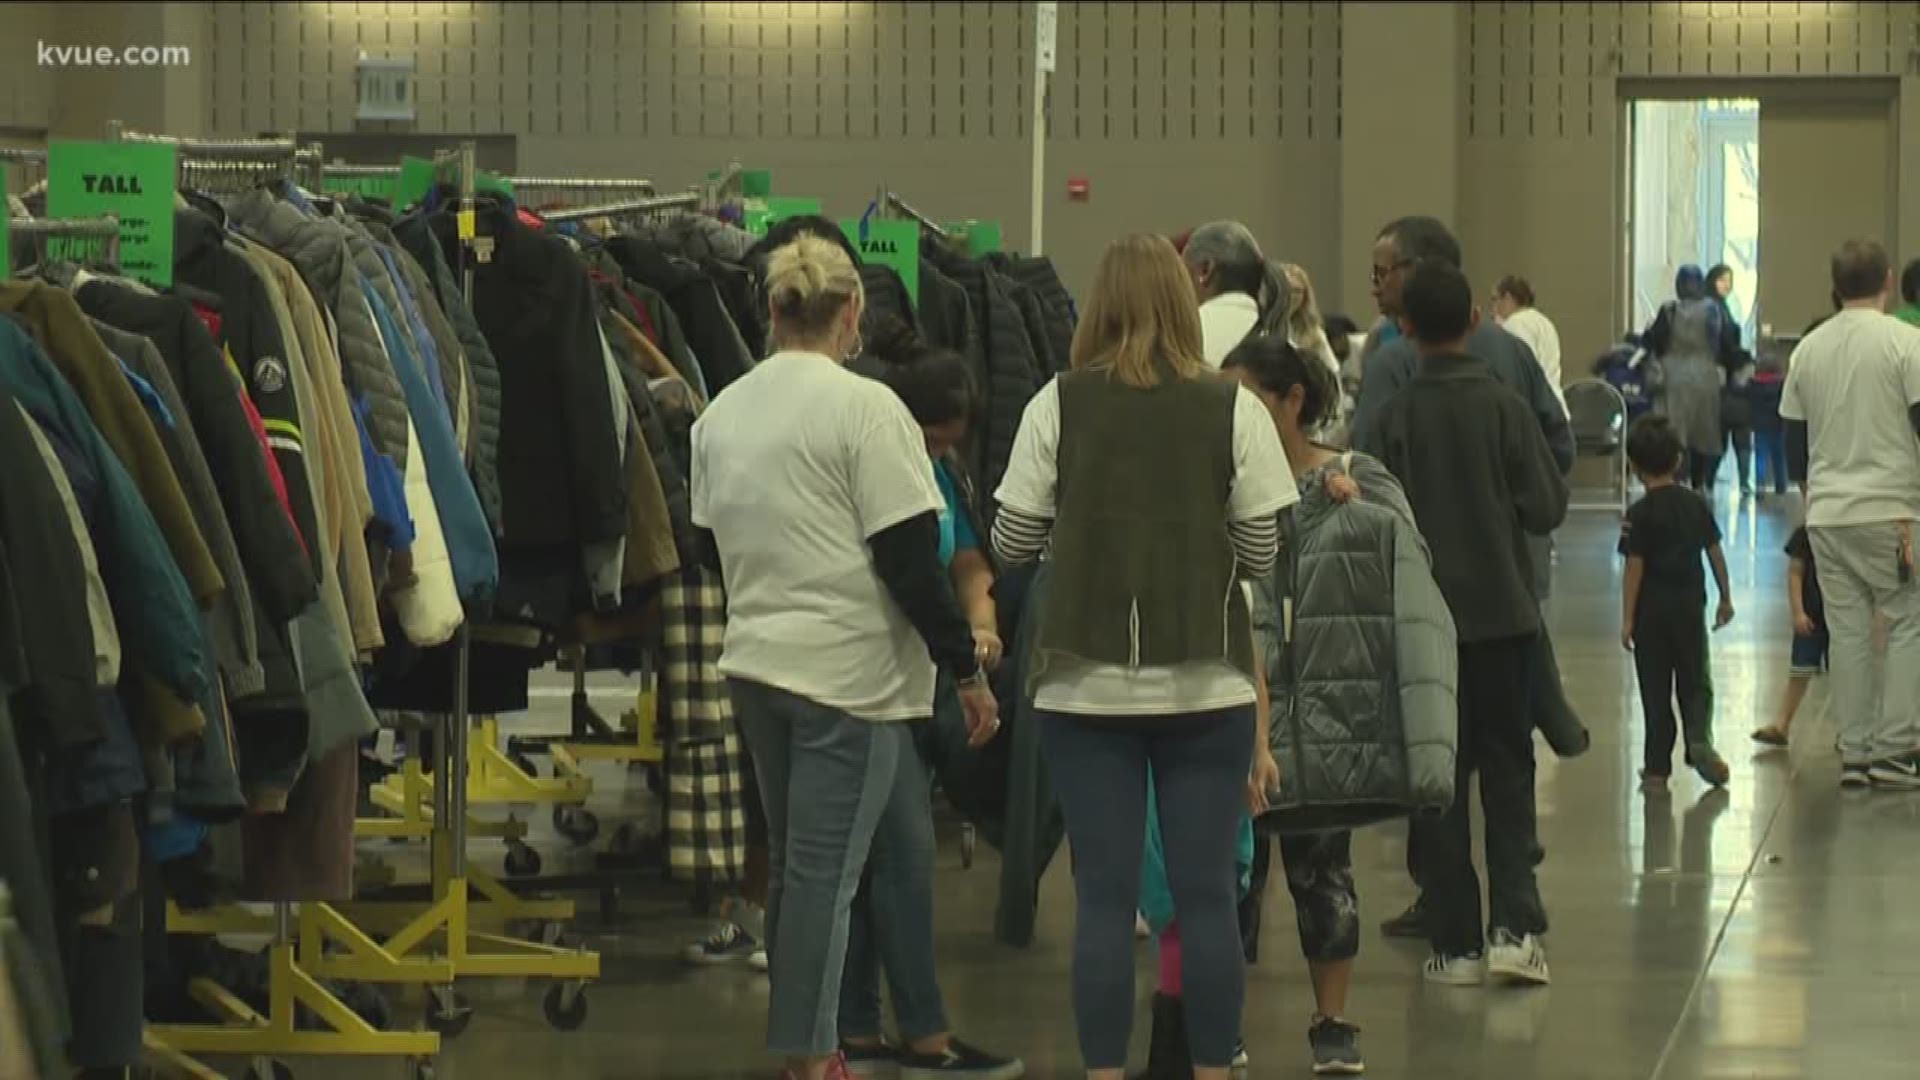 Thousands of children will have coats they need for the winter, thanks to the generous donors across Central Texas.